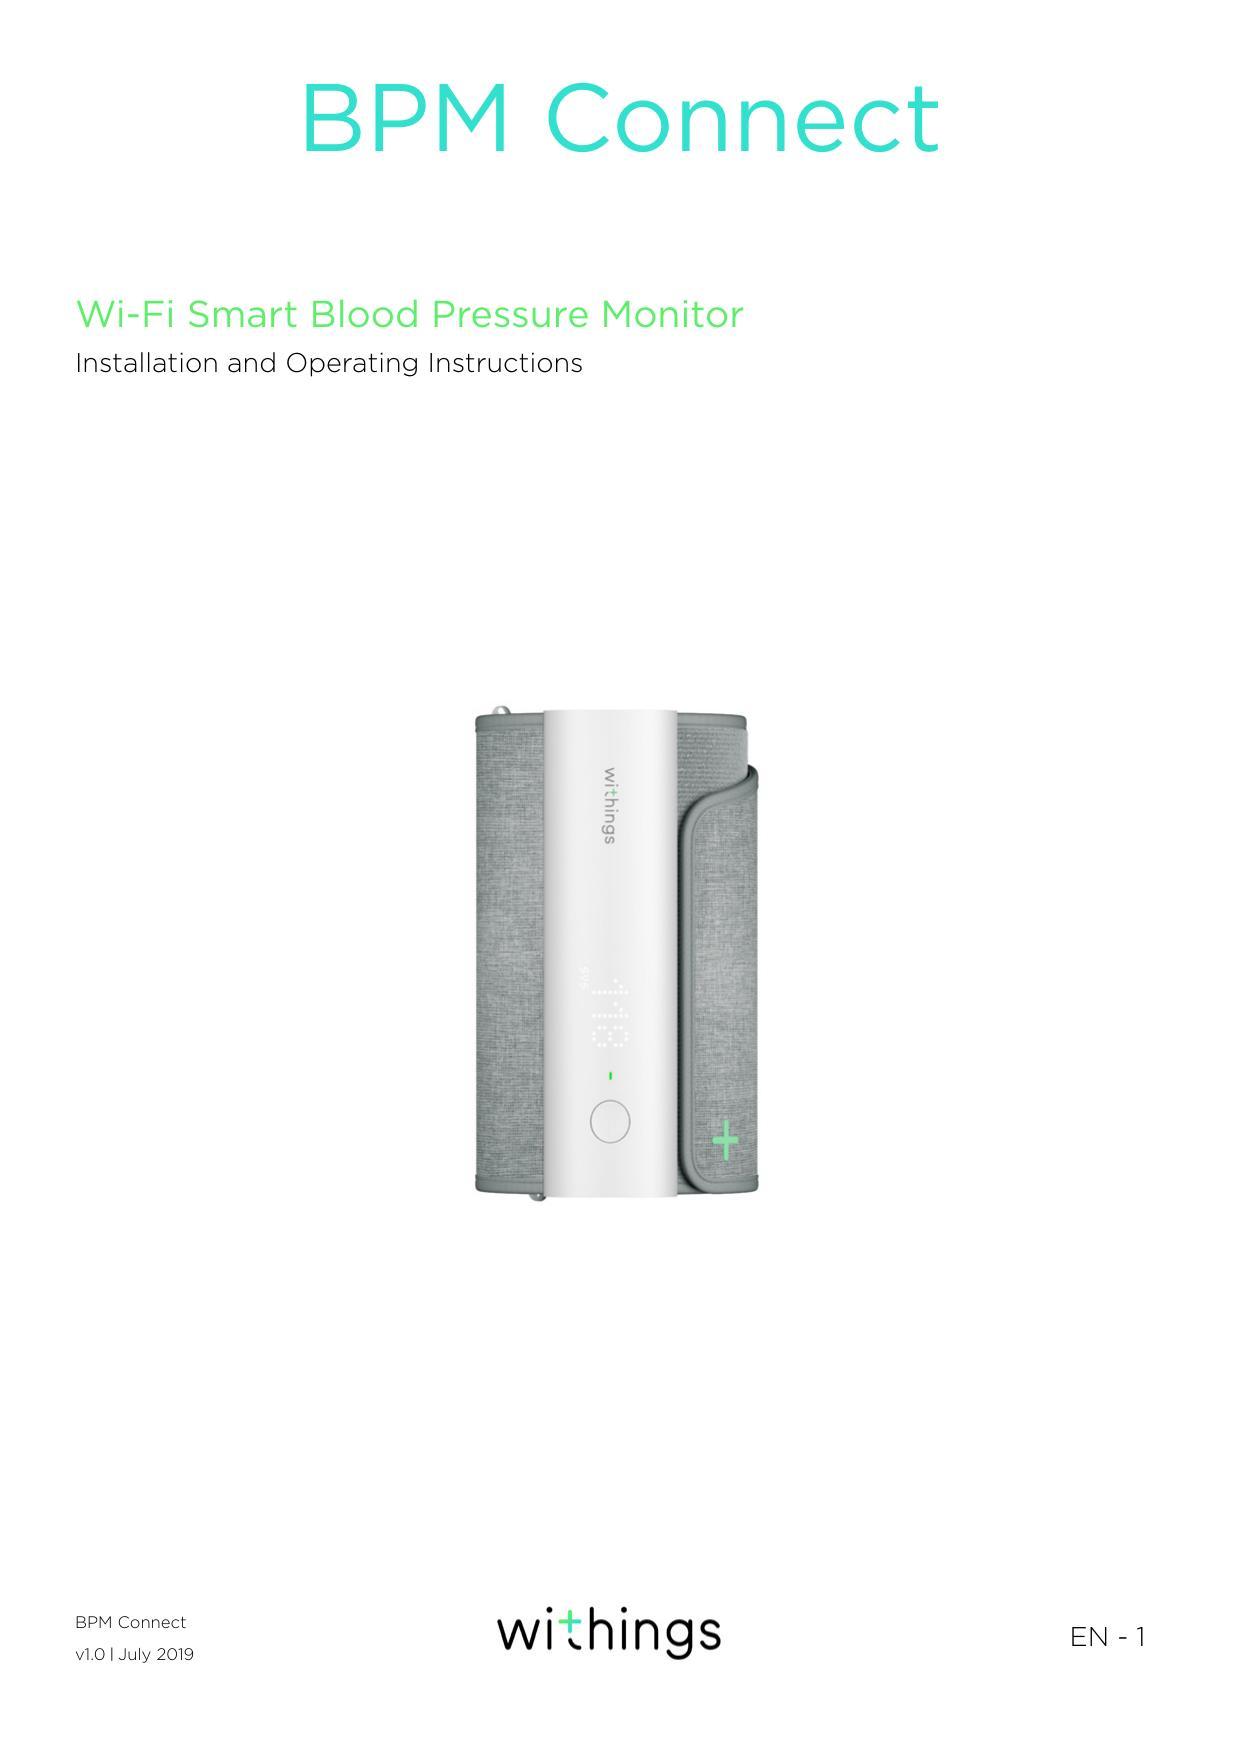 bpm-connect-wi-fi-smart-blood-pressure-monitor-installation-and-operating-instructions.pdf